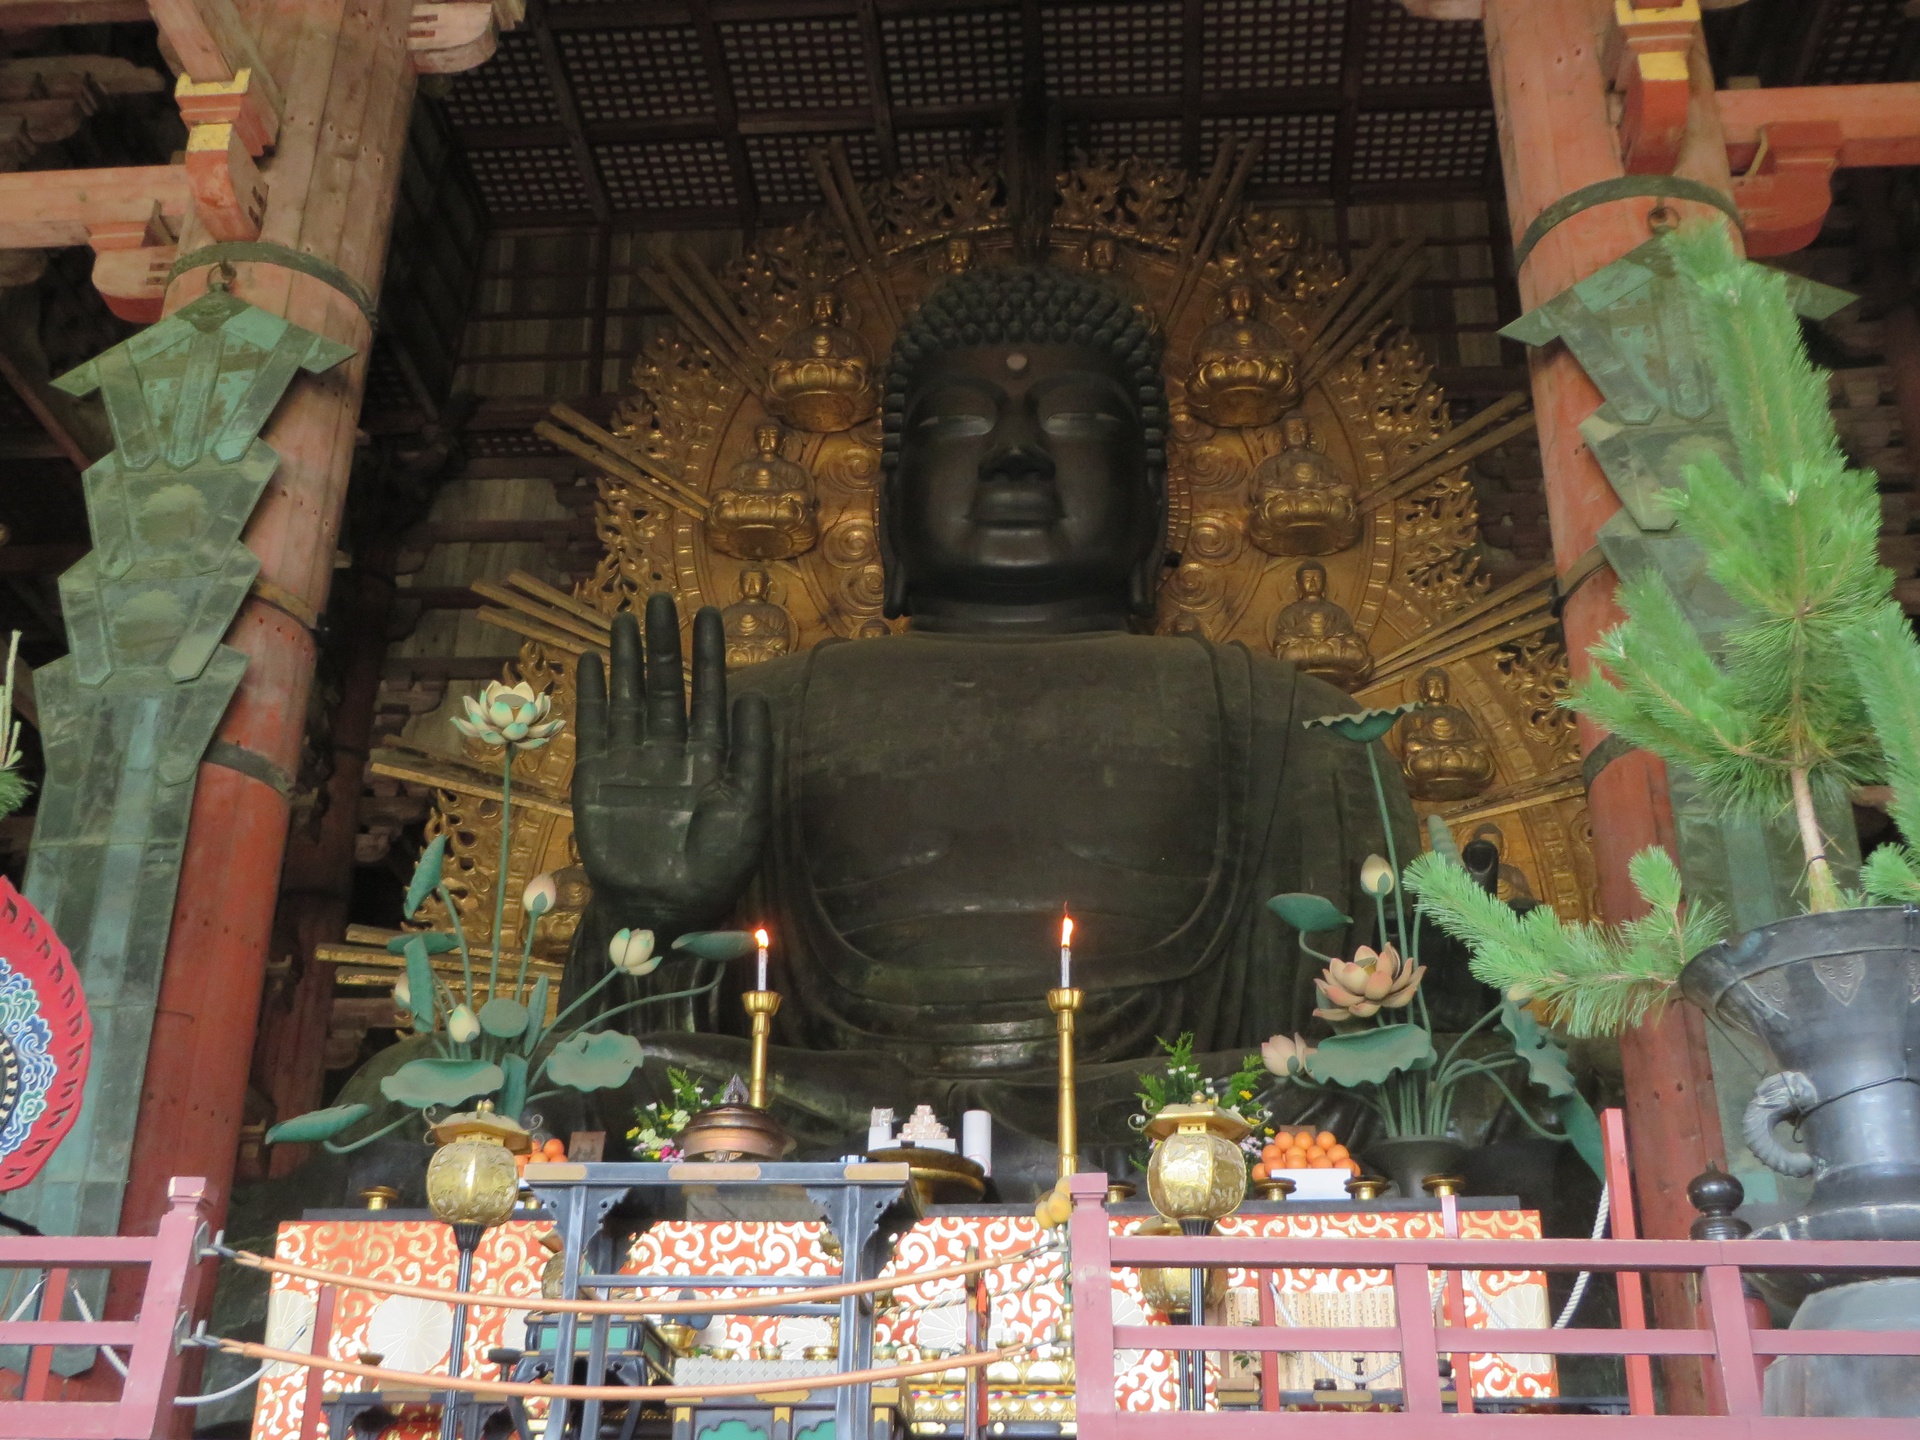 Large Buddha statue with intricate gold design and alter in front